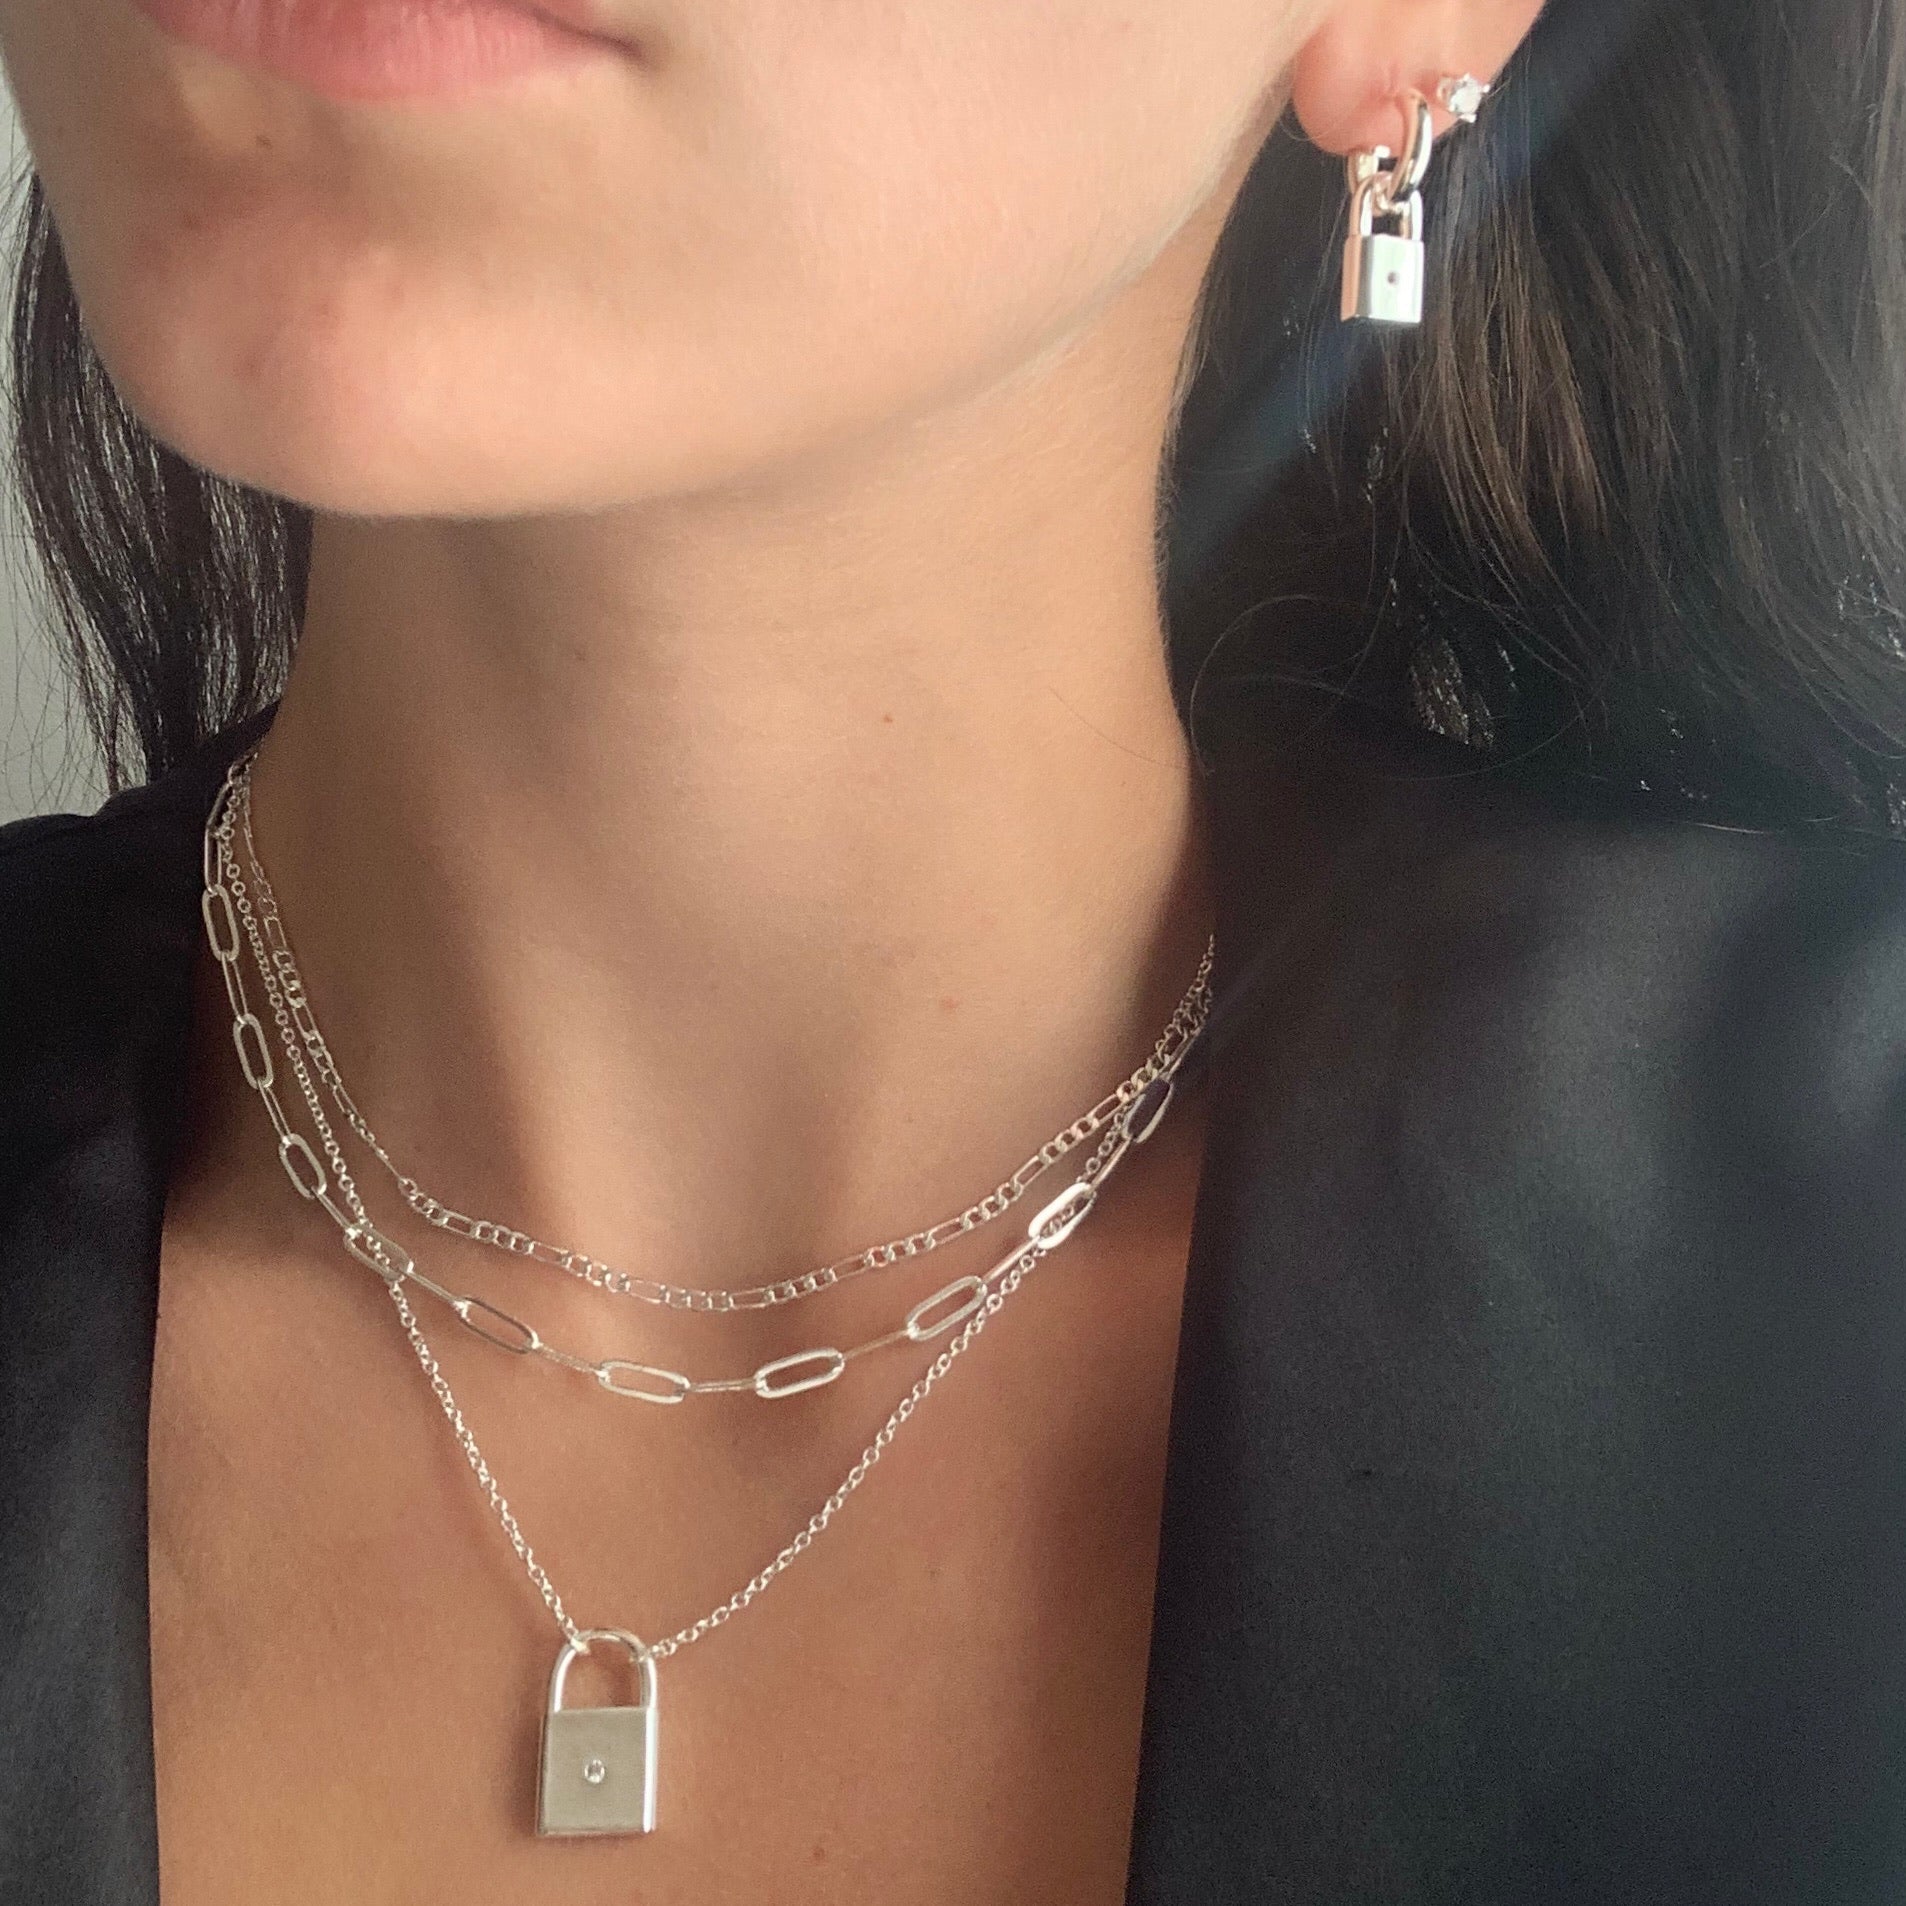 Products by Louis Vuitton: Silver Lockit pendant, sterling silver